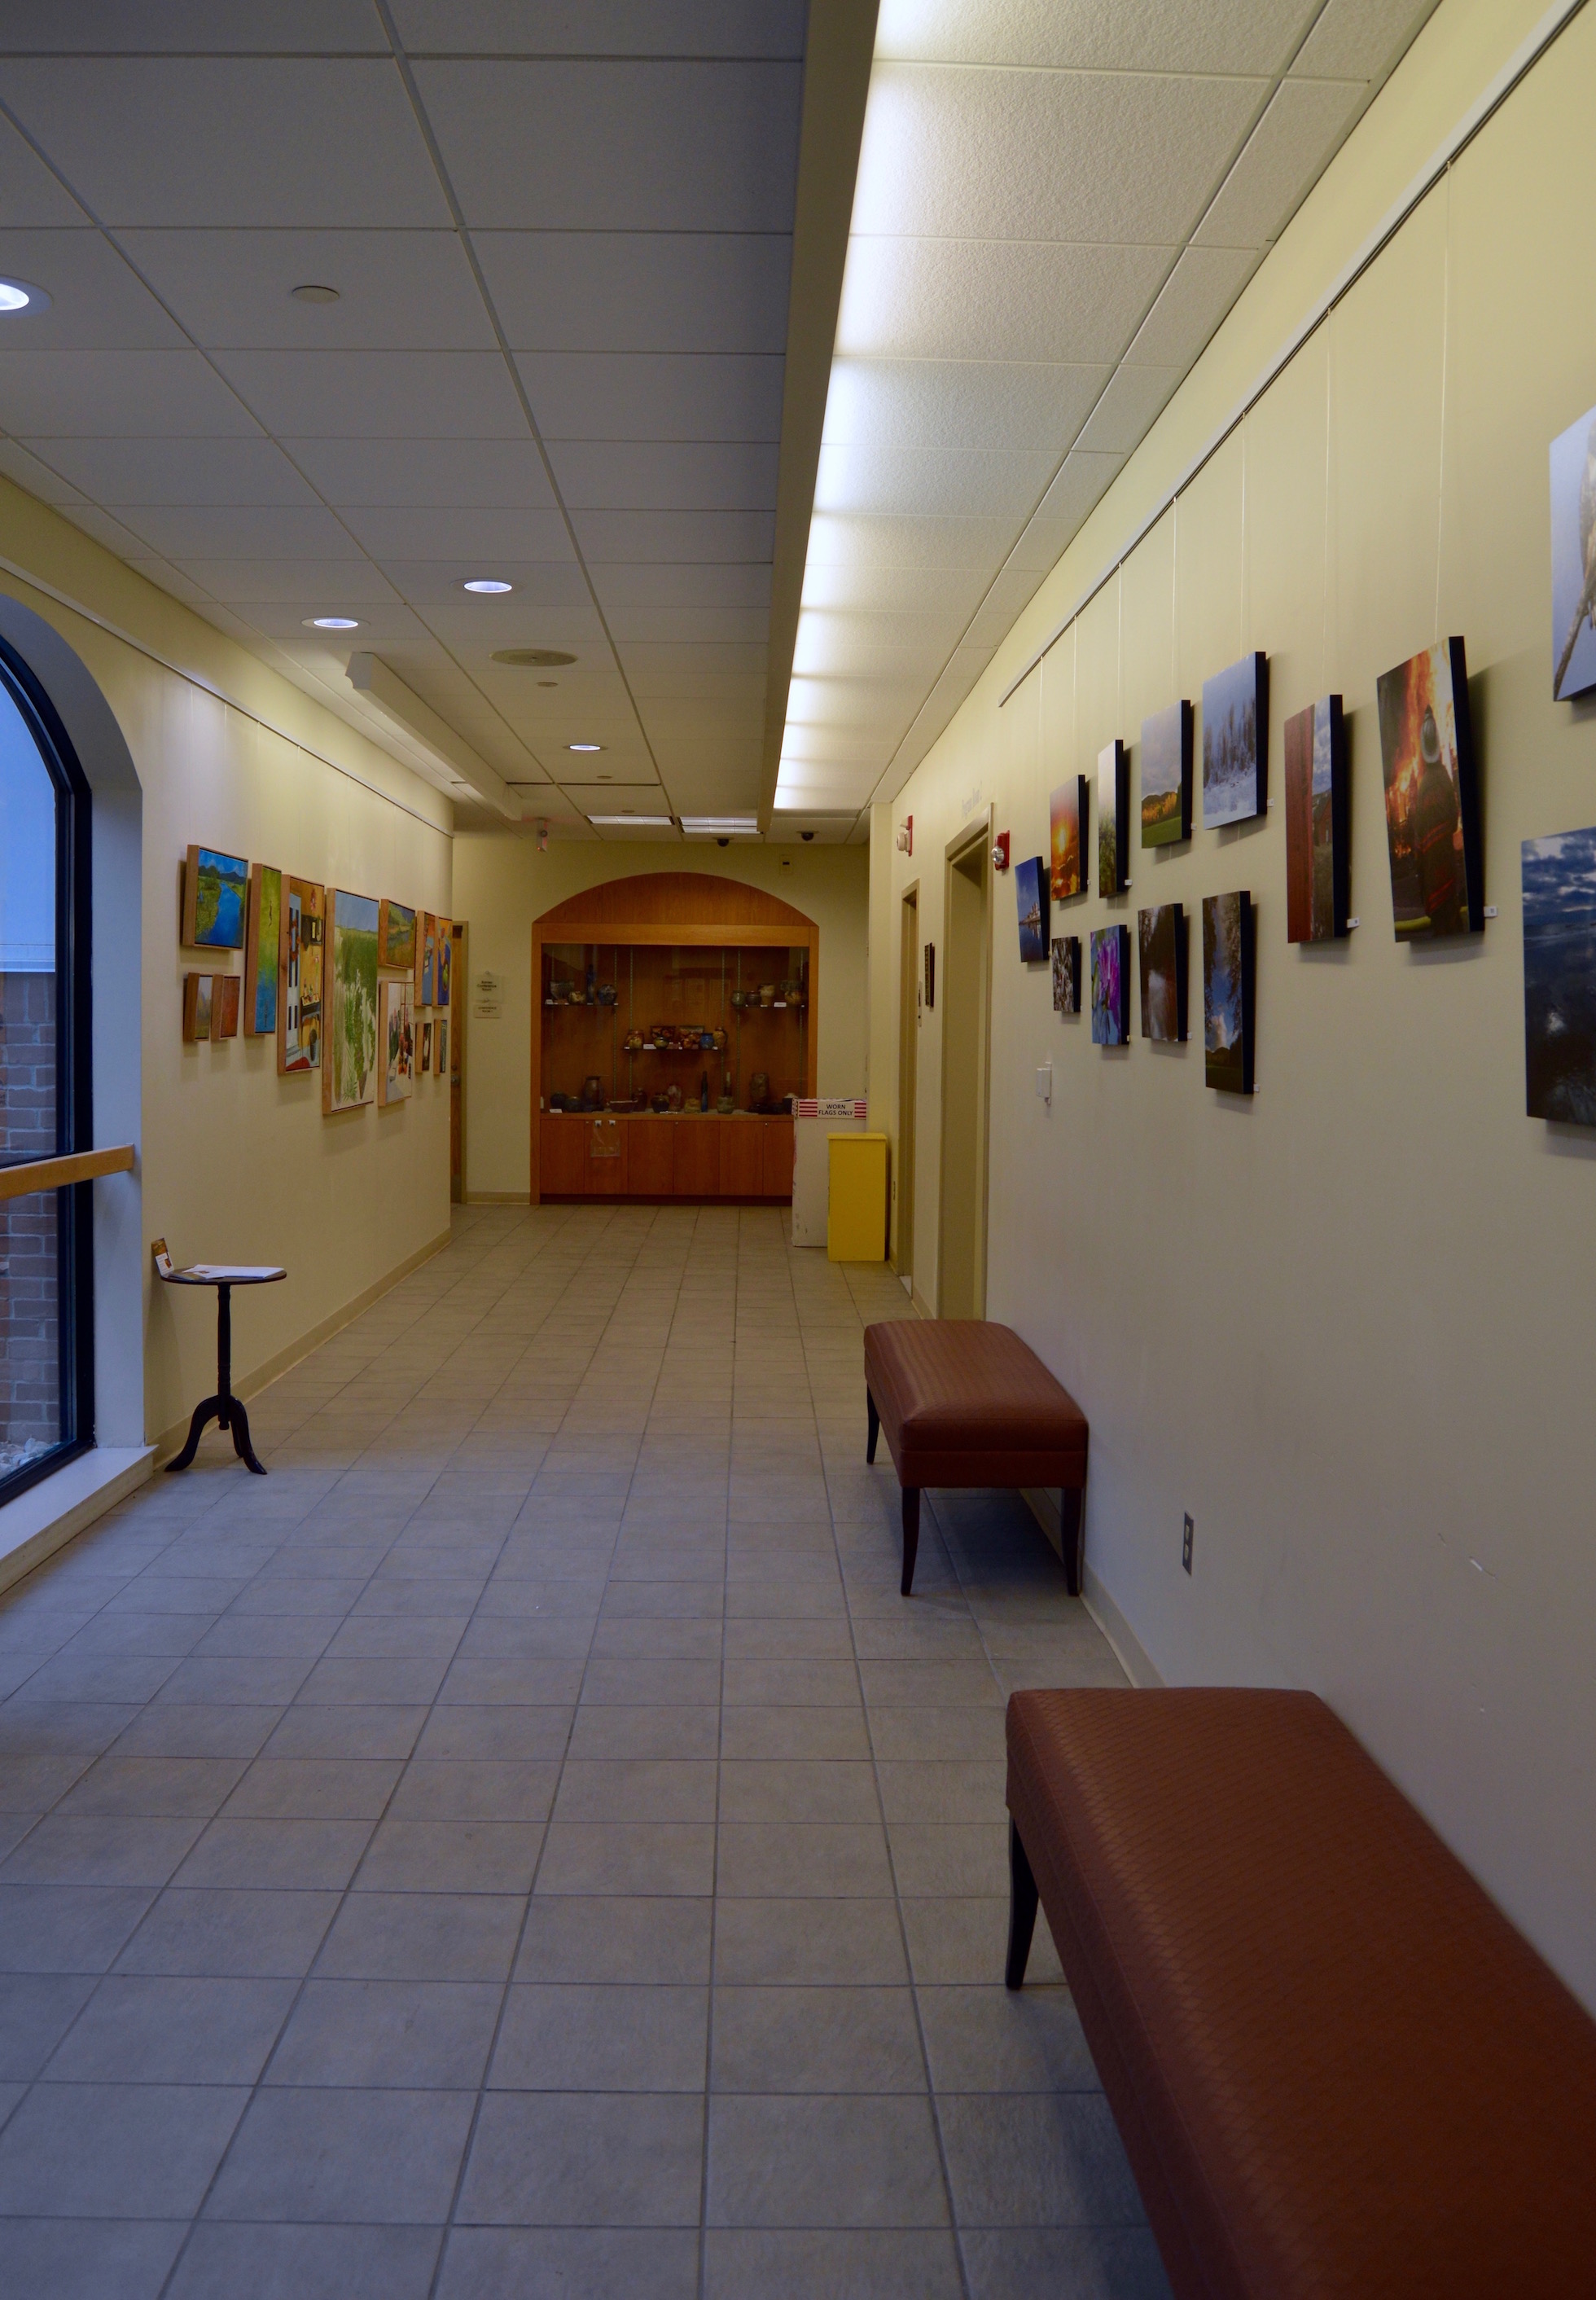 Kenneth and Cheryl Picard paintings and photos display at the Simsbury Public Library